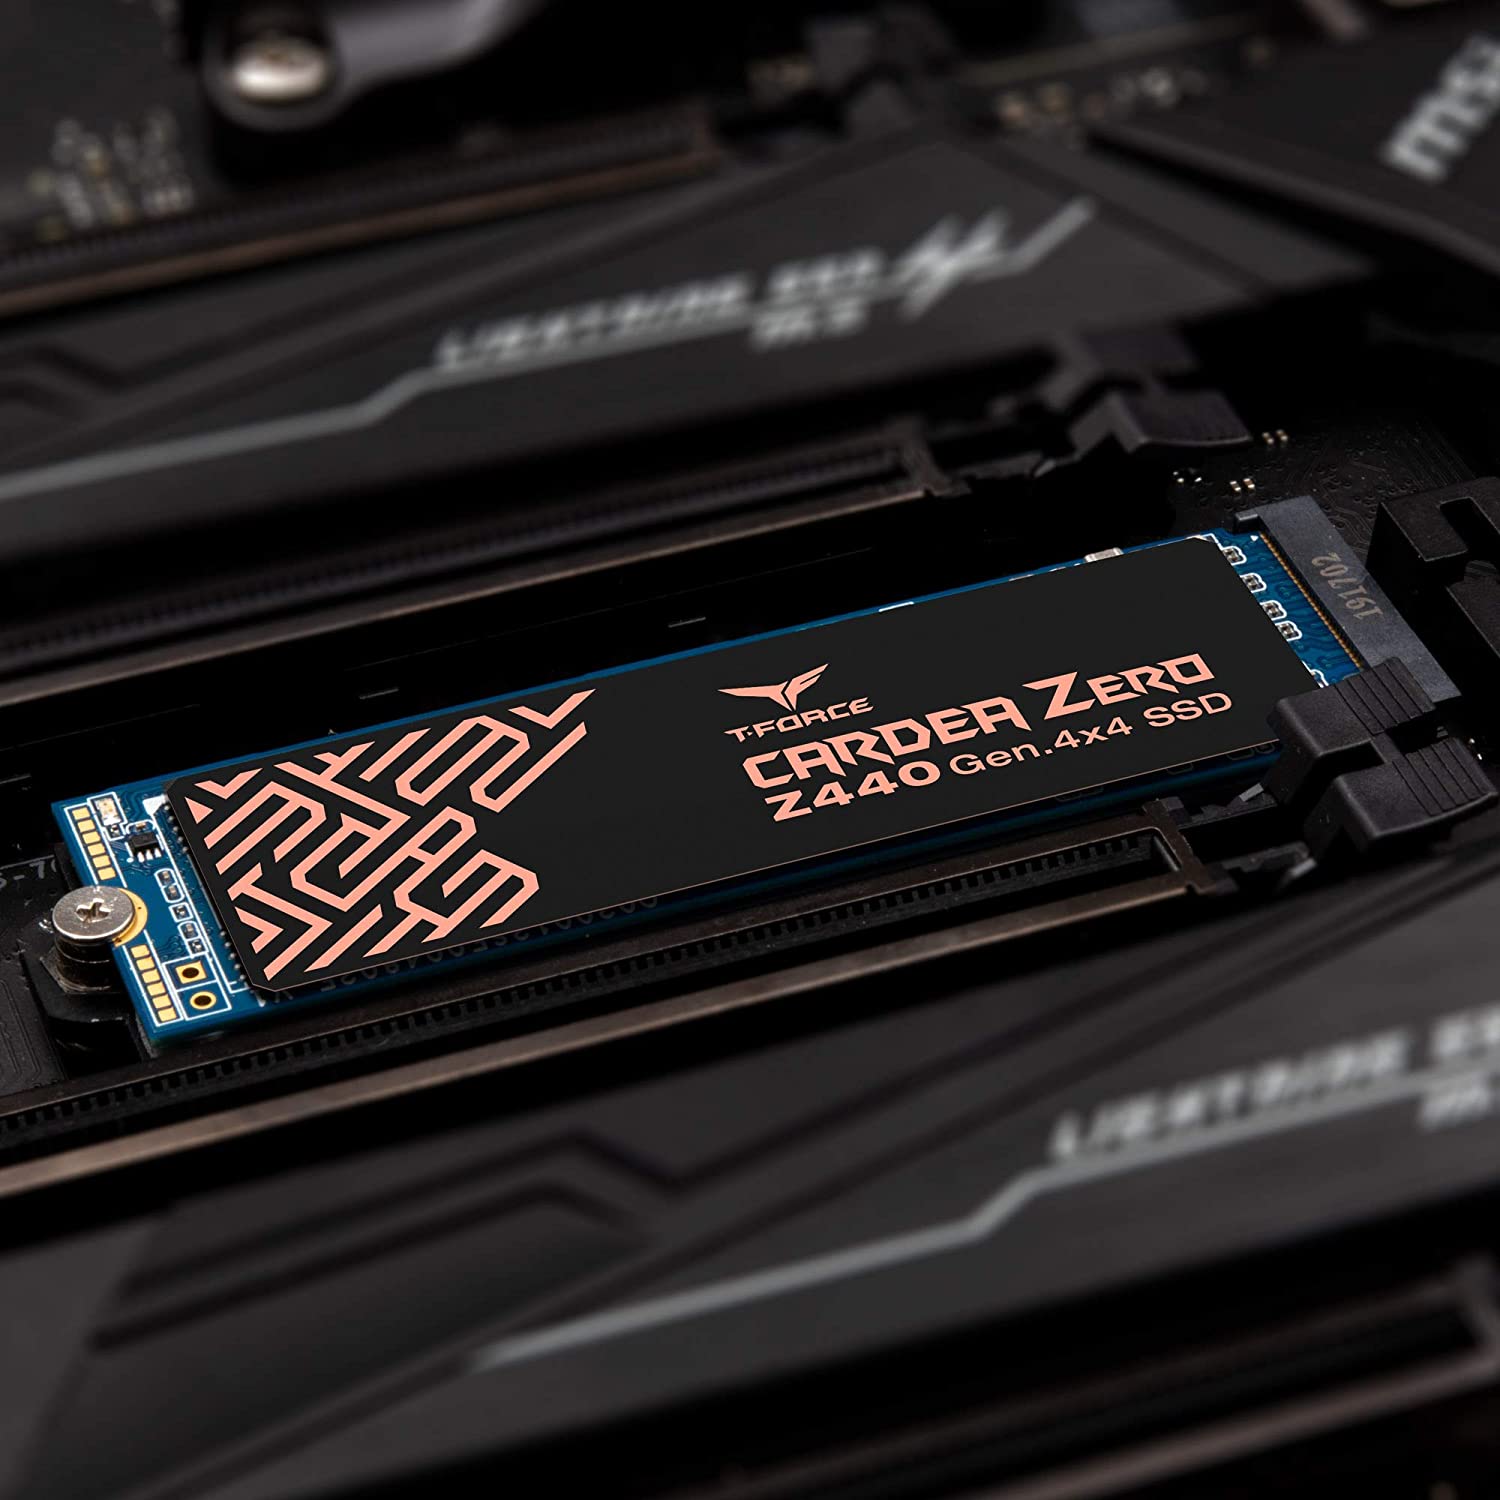 Top 5 Best SSDs of 2020 for Gaming to Video Editing From SATA to NVme! | Tech Times